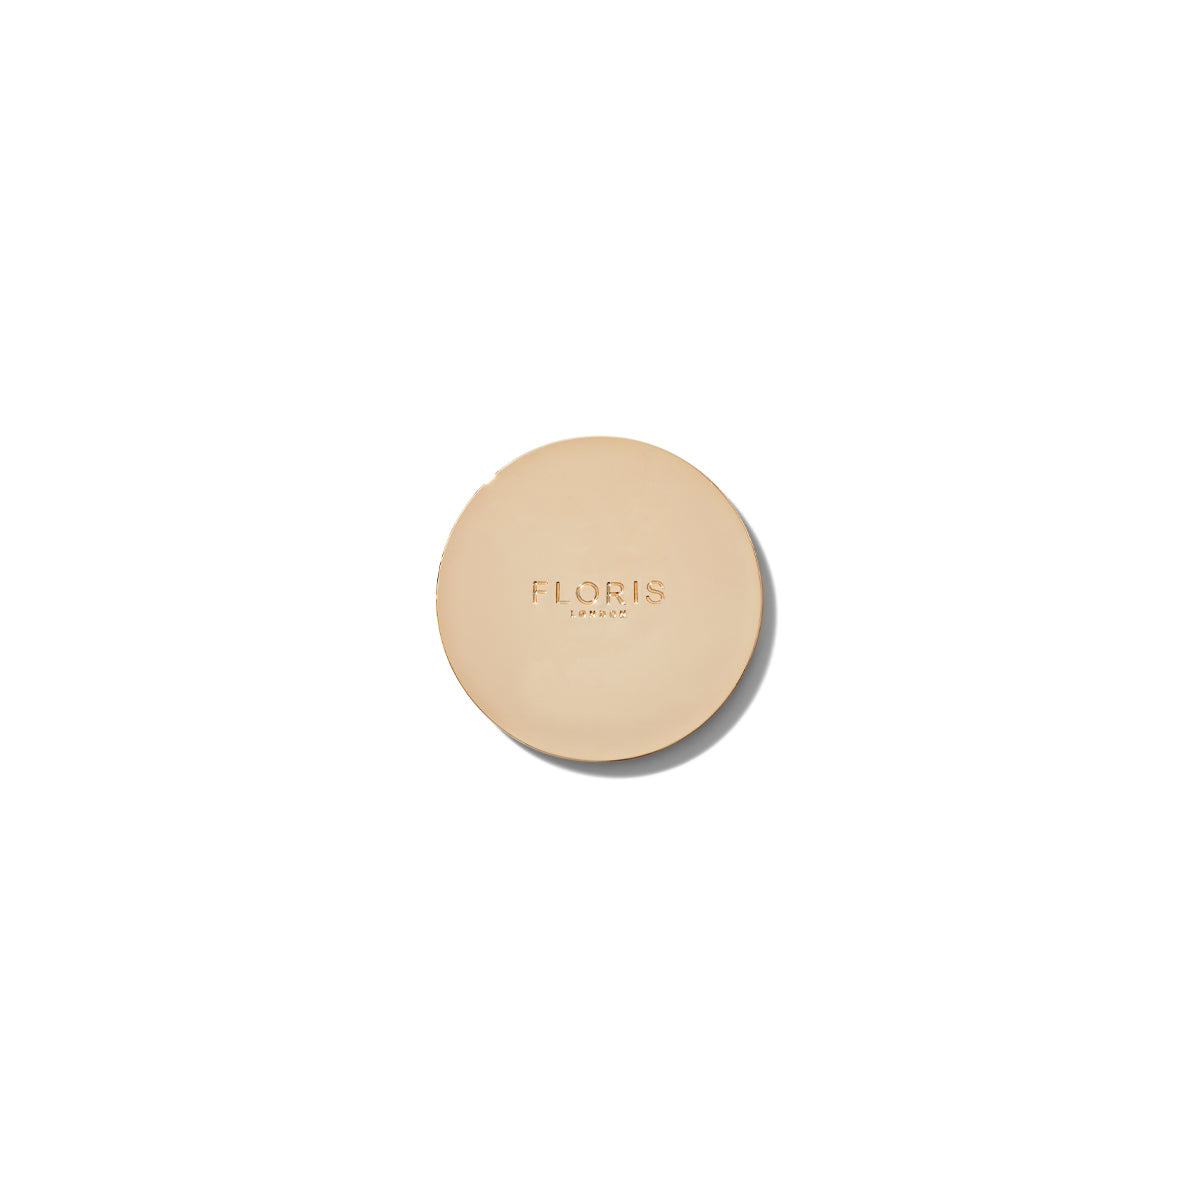 Golden Floris London Grapefruit & Rosemary Scented Candle Lid